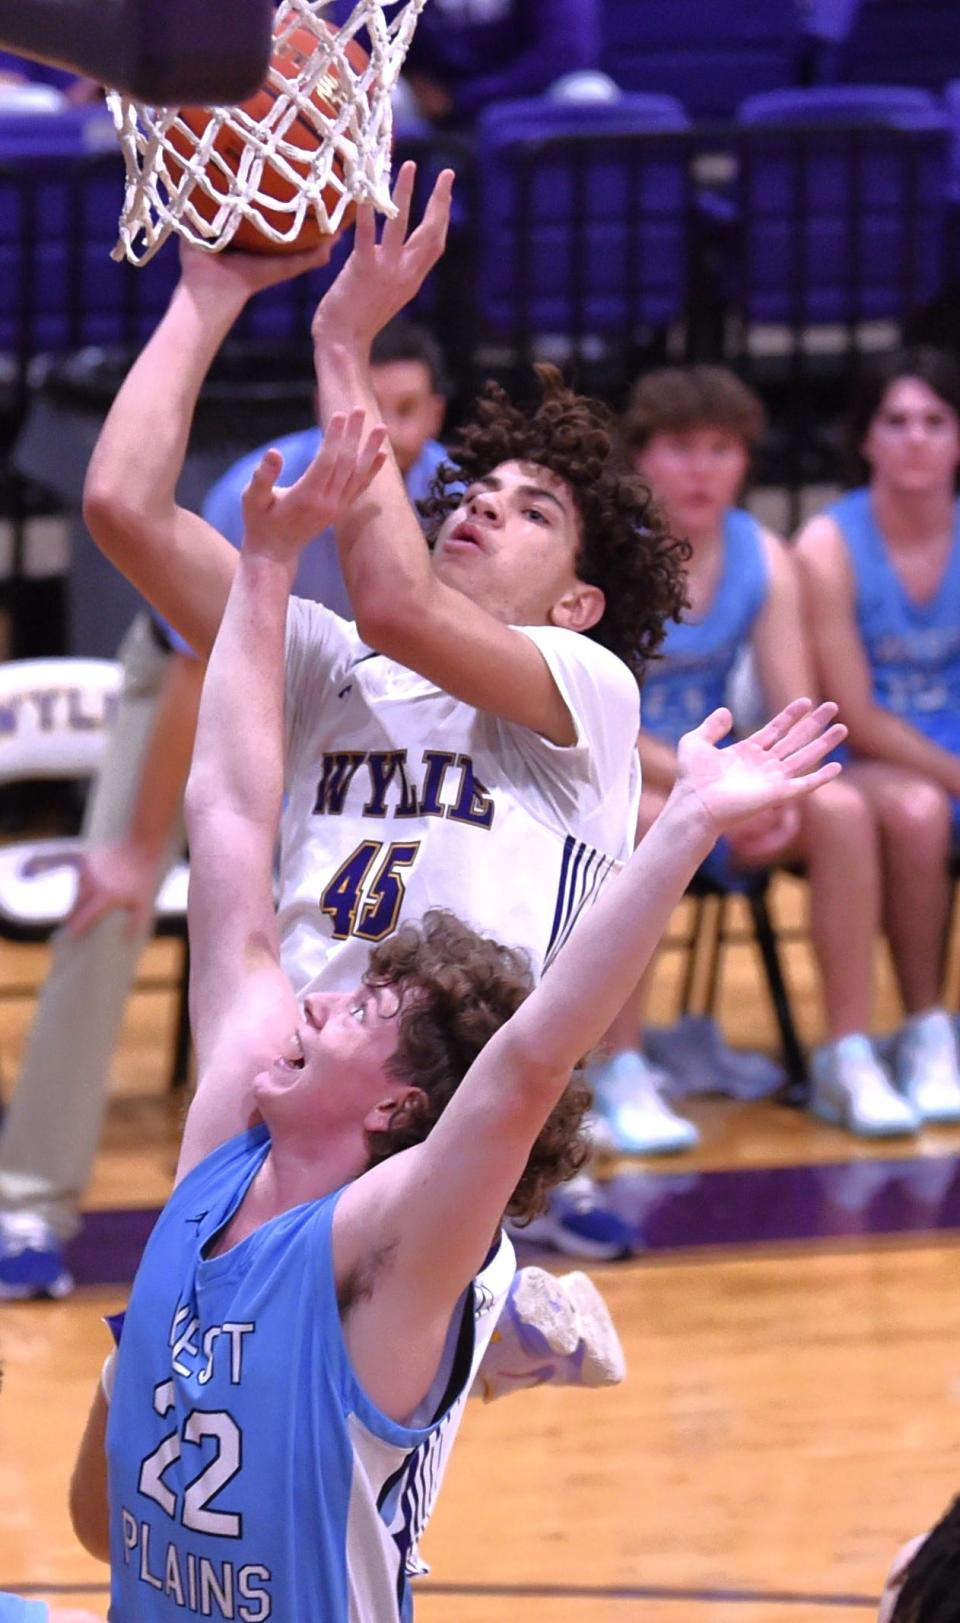 Wylie's Will Evans (45) shoots over West Plains' Cade Bullard in the first half. The Wolves beat Wylie 57-53 on the opening day of the Wylie Lions Club's Catclaw Classic on Thursday at Bulldog Gym.